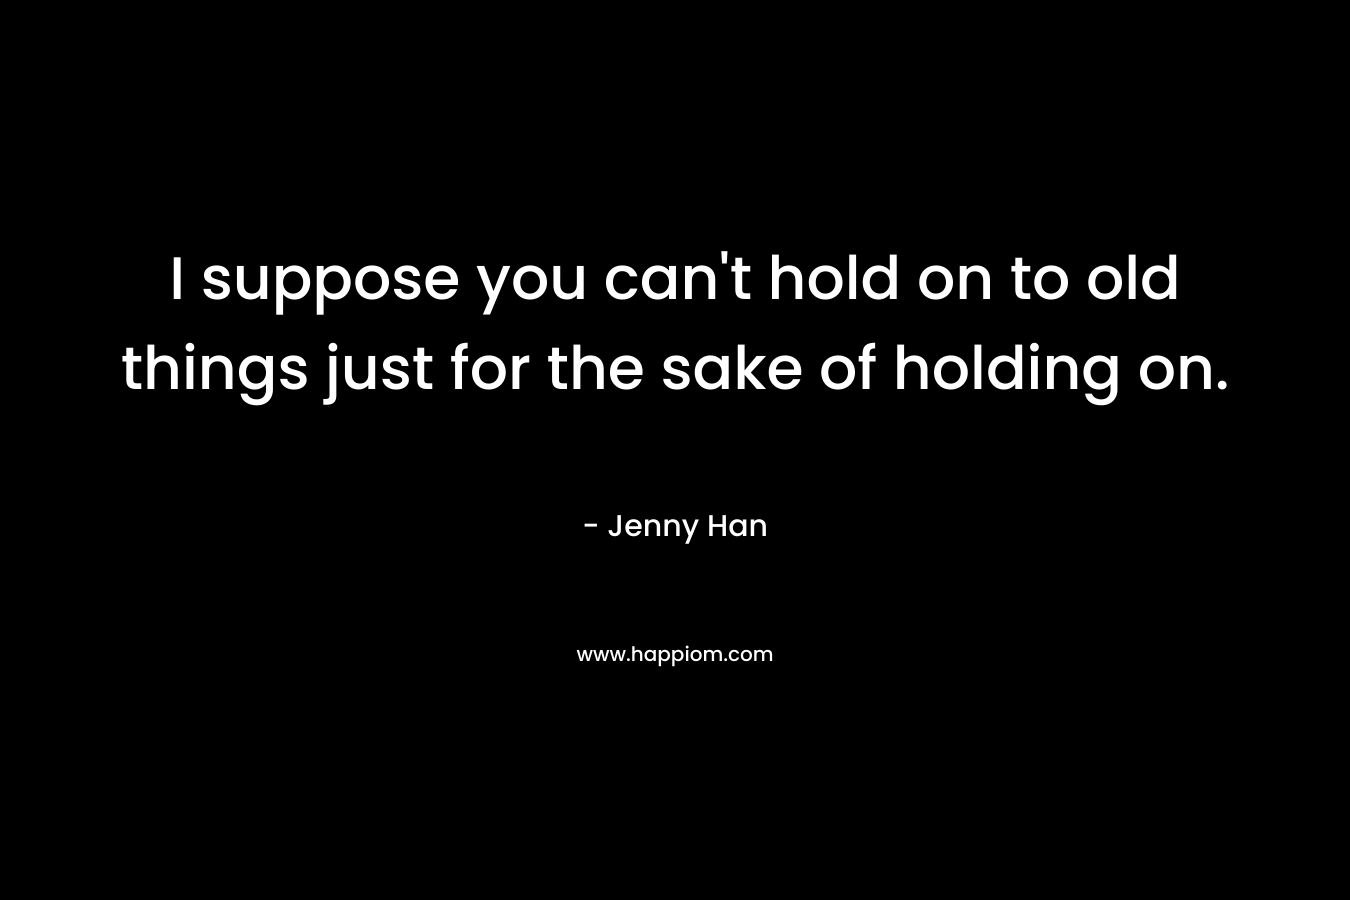 I suppose you can’t hold on to old things just for the sake of holding on. – Jenny Han